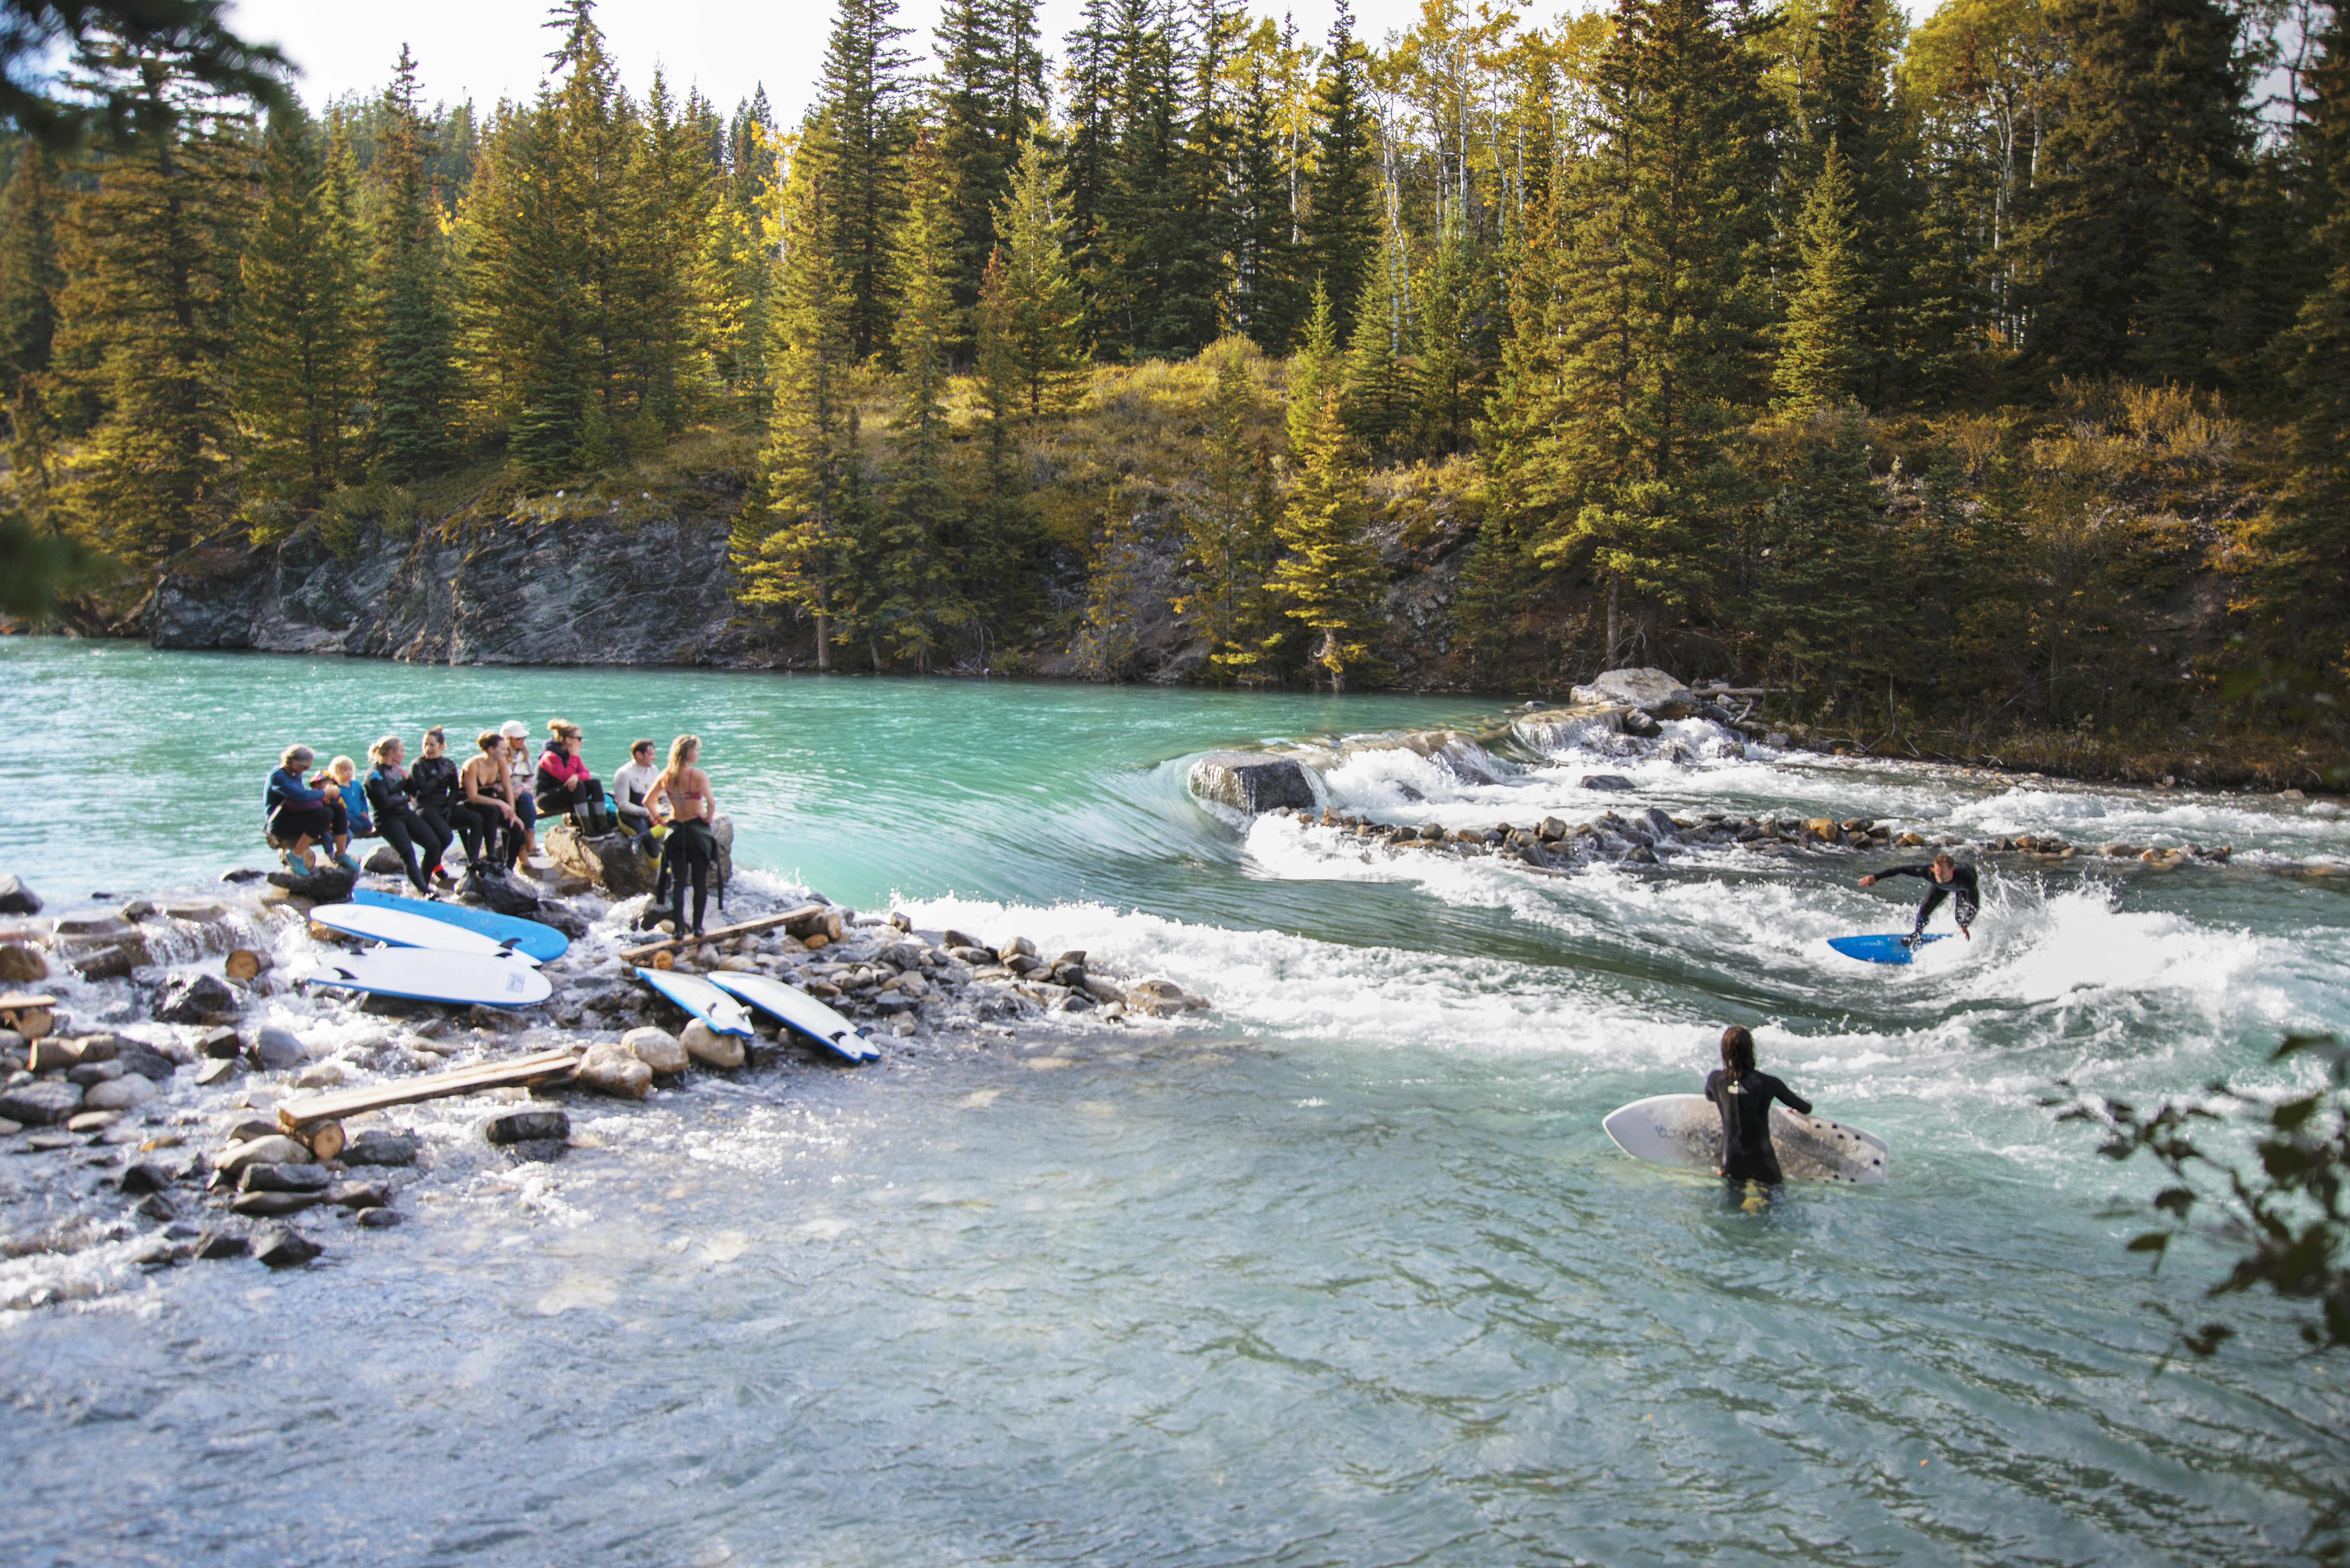 a group of surfers in wetsuits on a river surfing